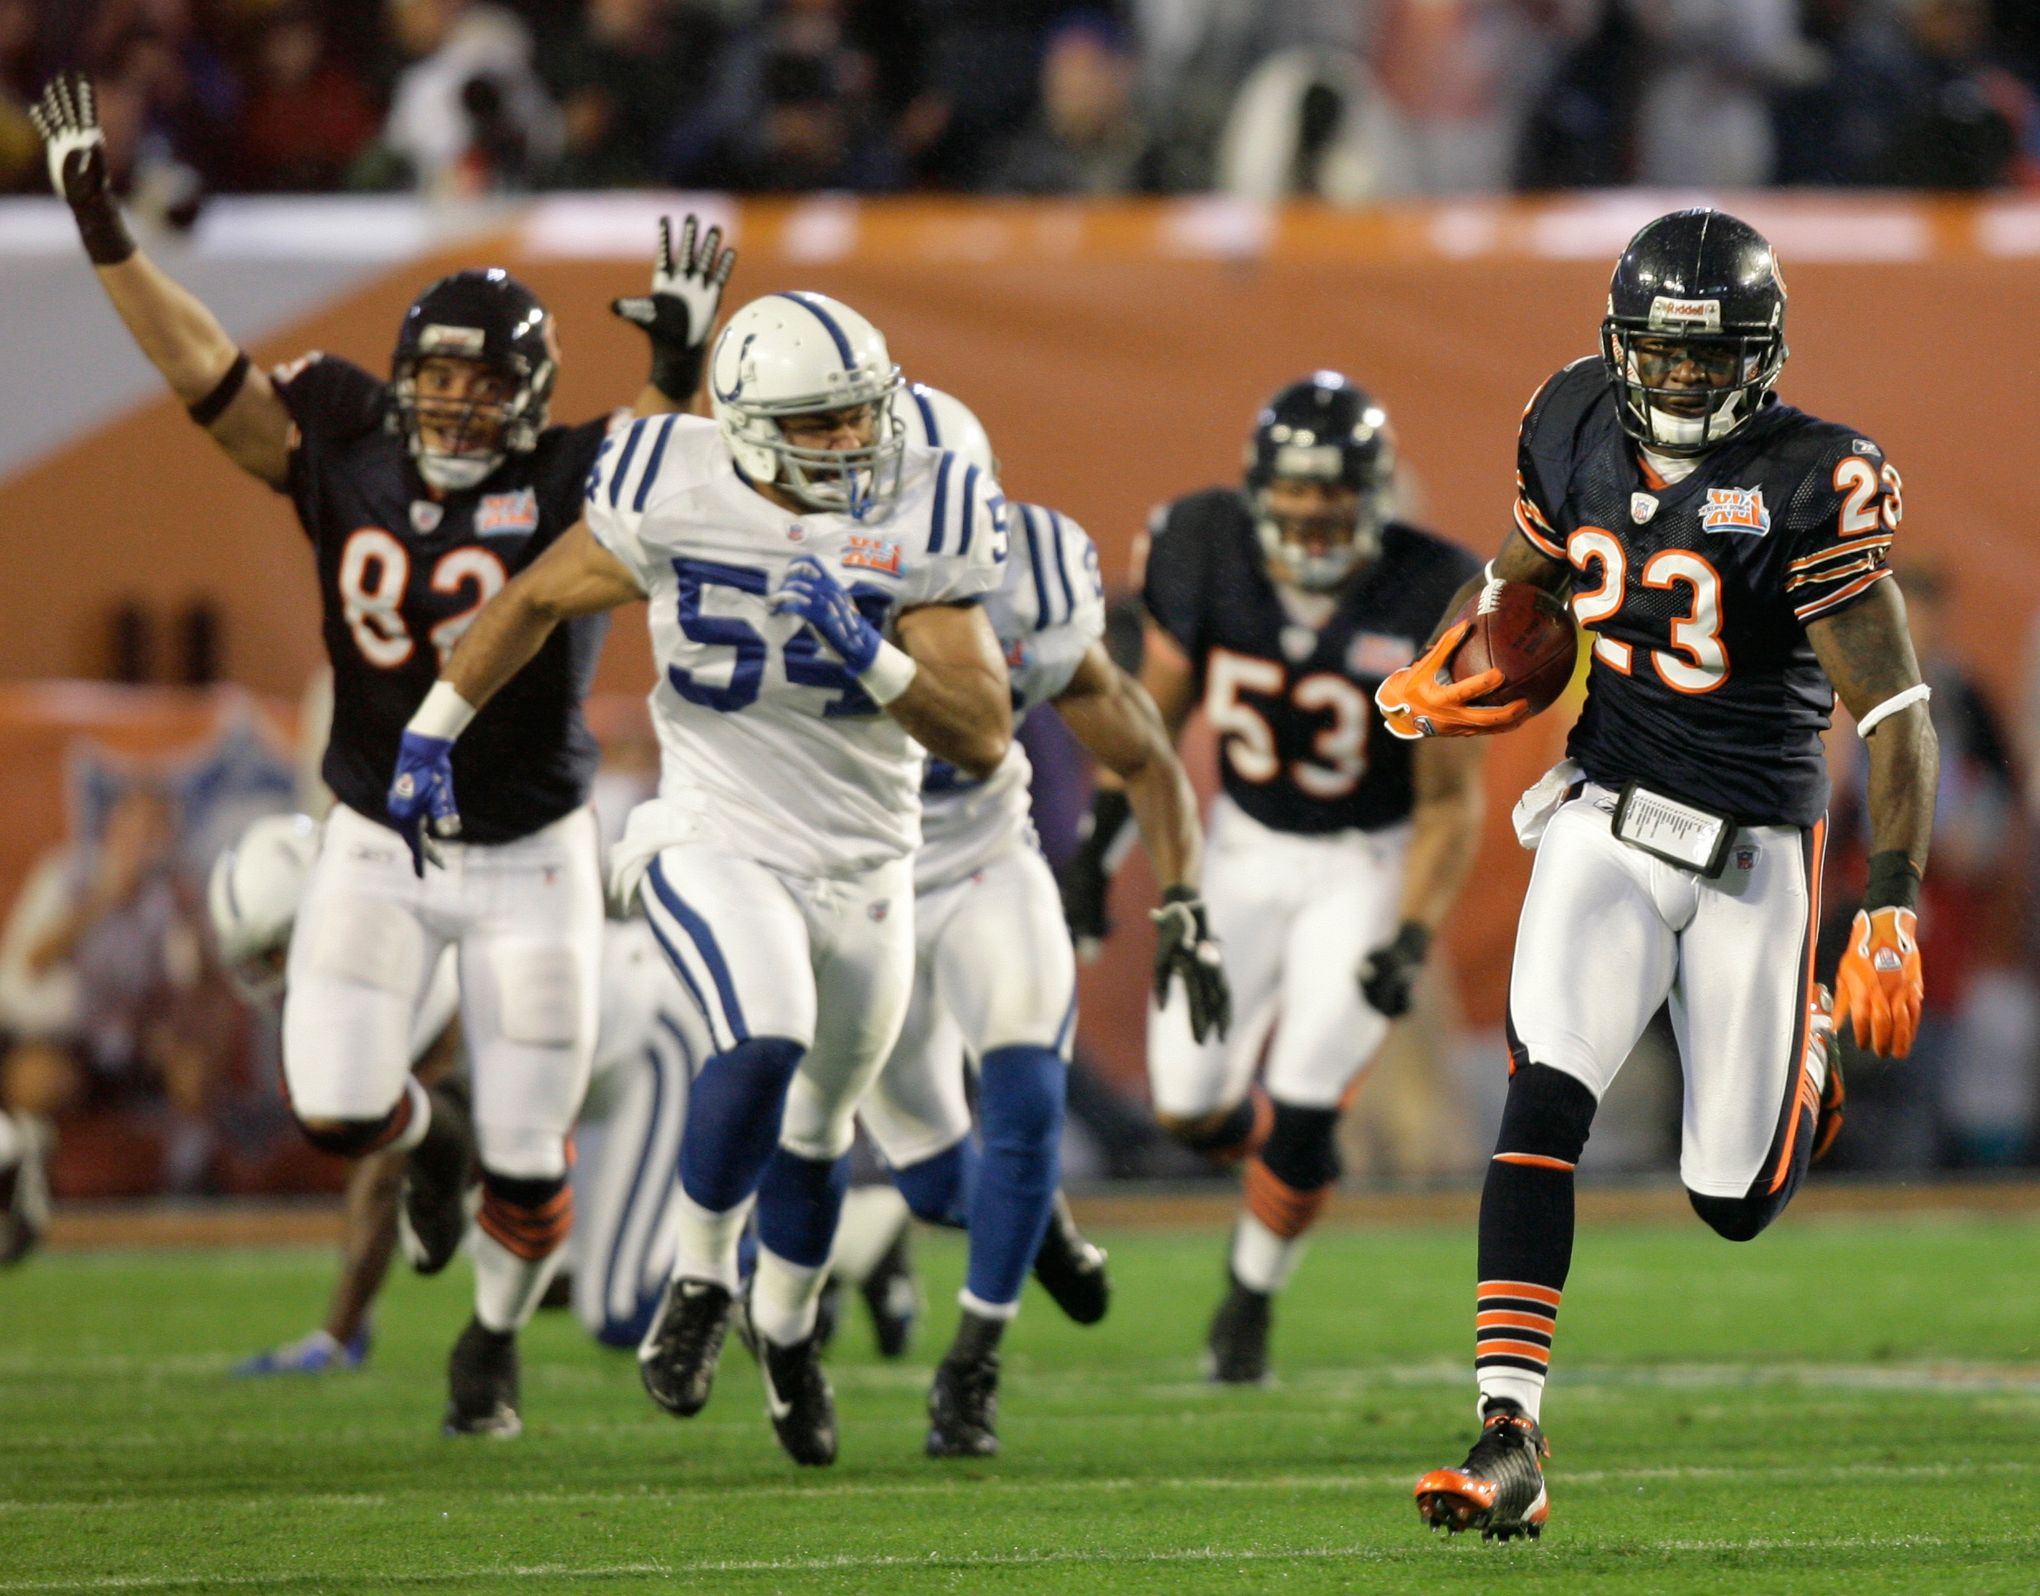 Is former Chicago Bears star Devin Hester a Hall of Famer? You bet